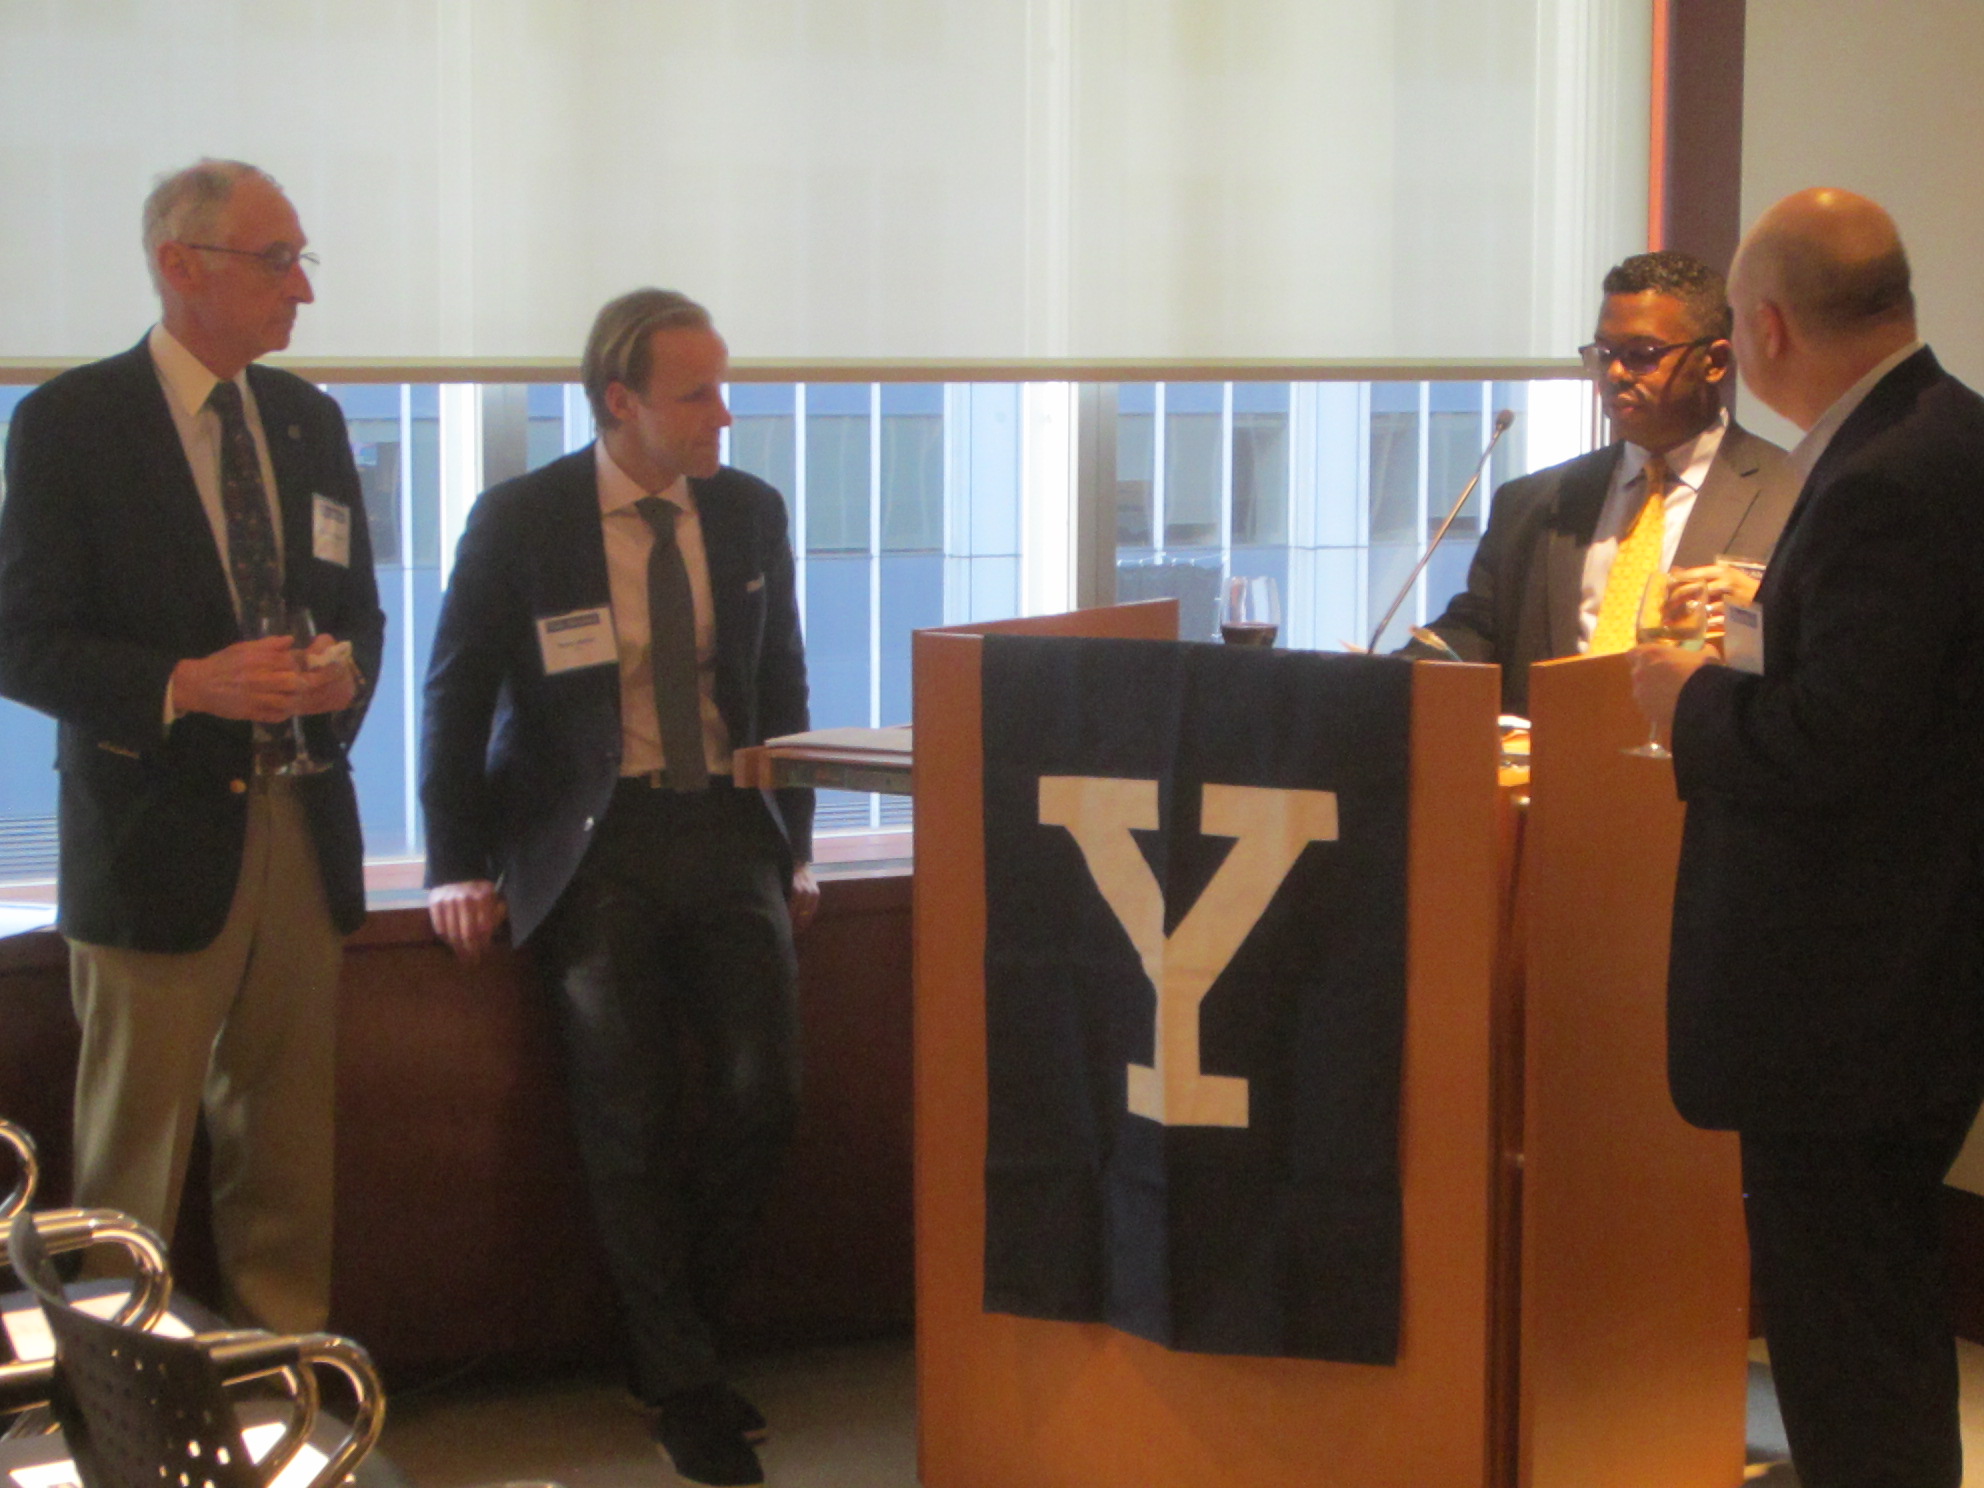 Sulexan Chery ’15 MBA, YaleFin co-chair, delivers opening remarks at the Impact Investing program. He is joined by fellow co-chairs, Tom Opladen ’66 (left) and Neil Hohmann ’91 (right), and program co-moderator Ross Mellor ’08 MBA. Photo: Henry Kwan